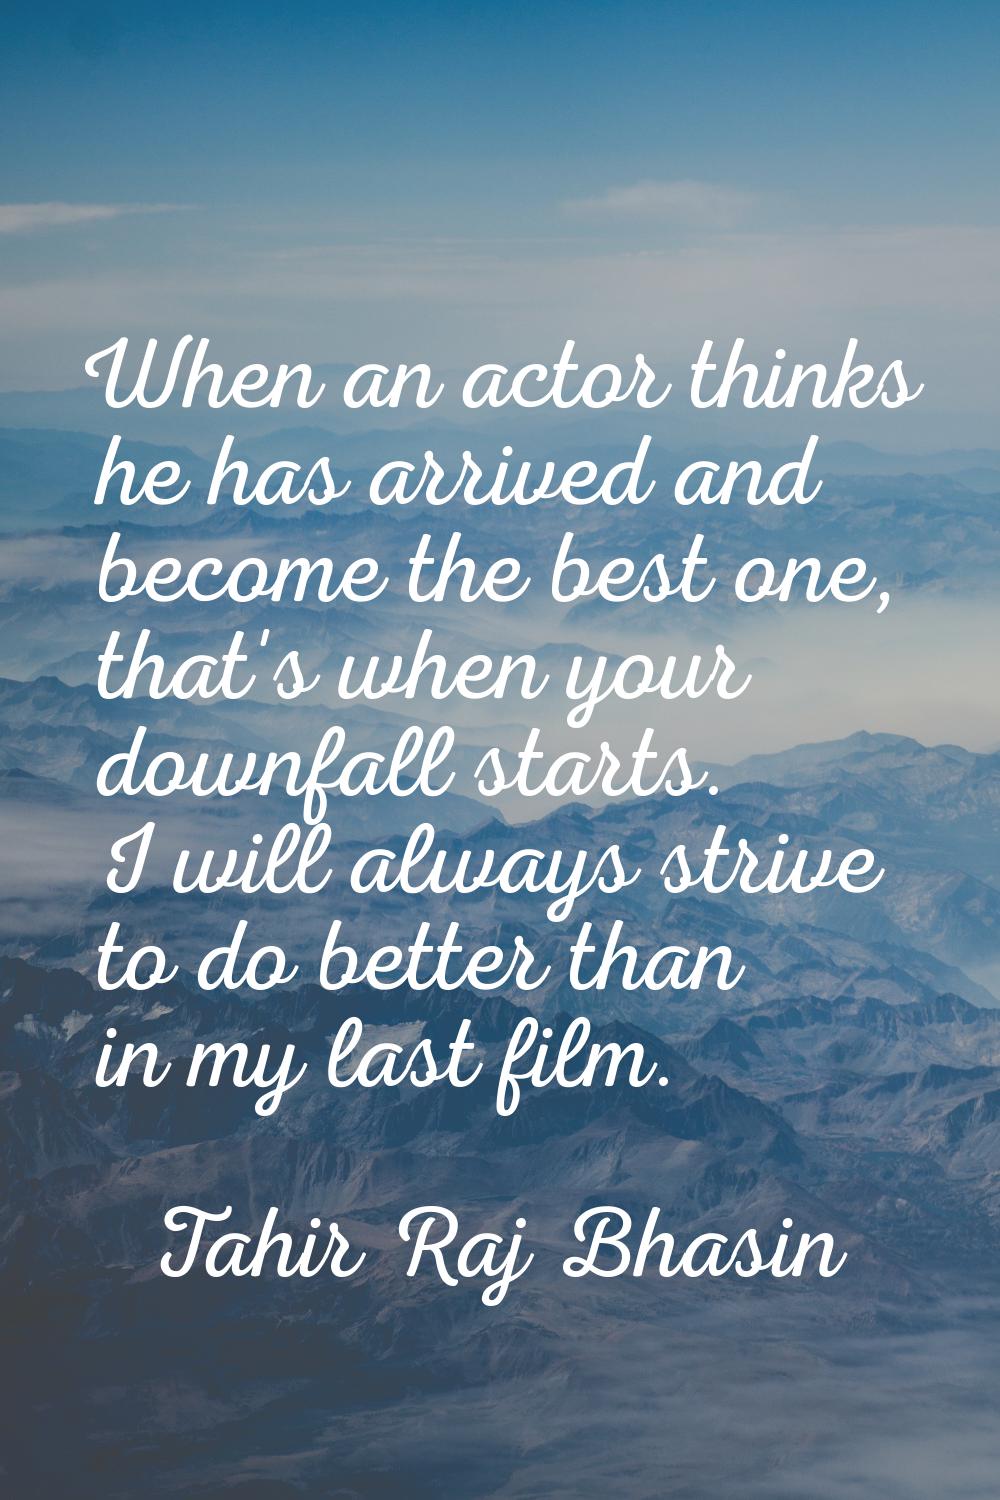 When an actor thinks he has arrived and become the best one, that's when your downfall starts. I wi